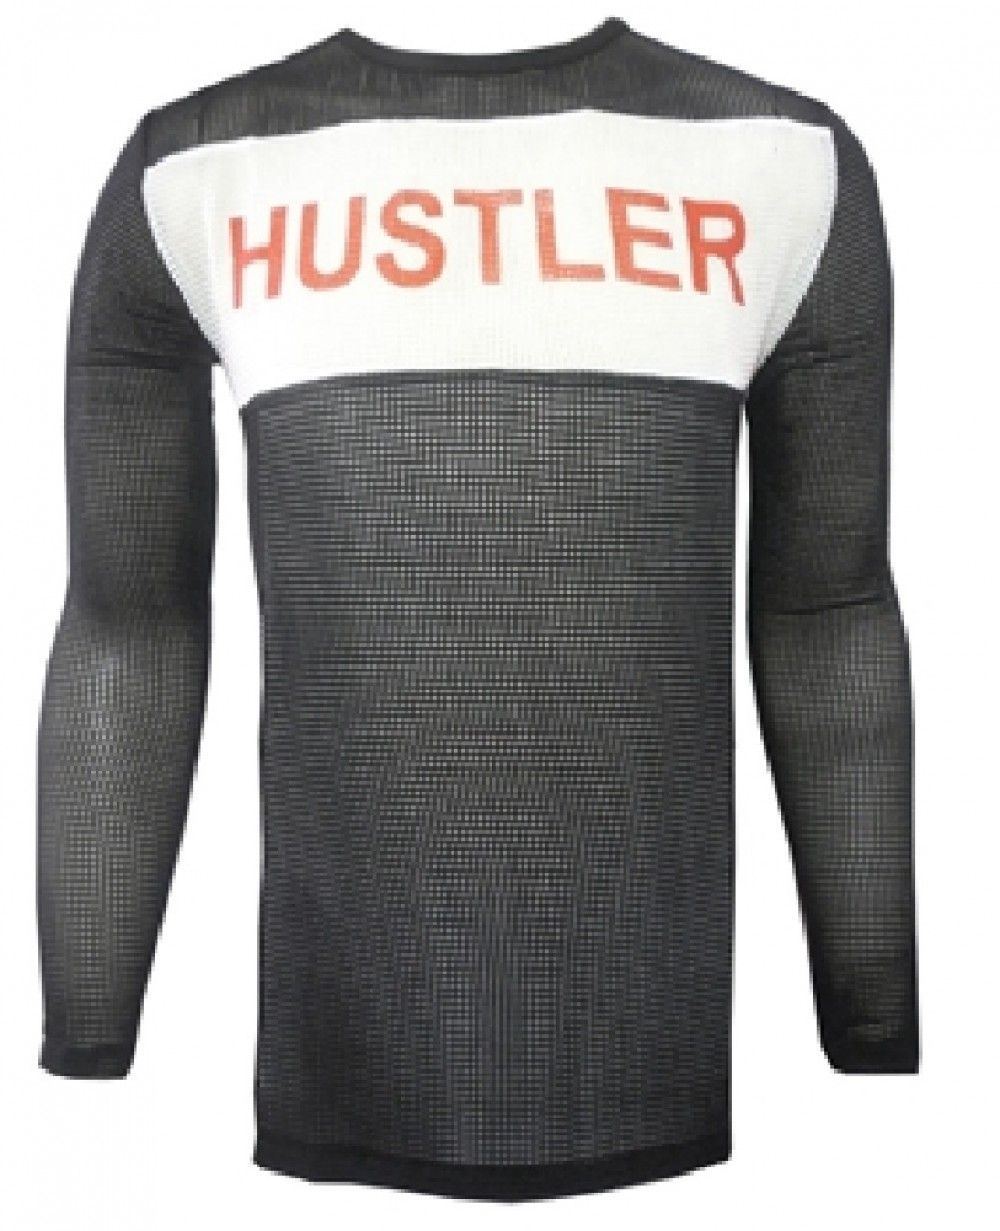 Interference reccomend Hustler fishnet tee long sleeve top